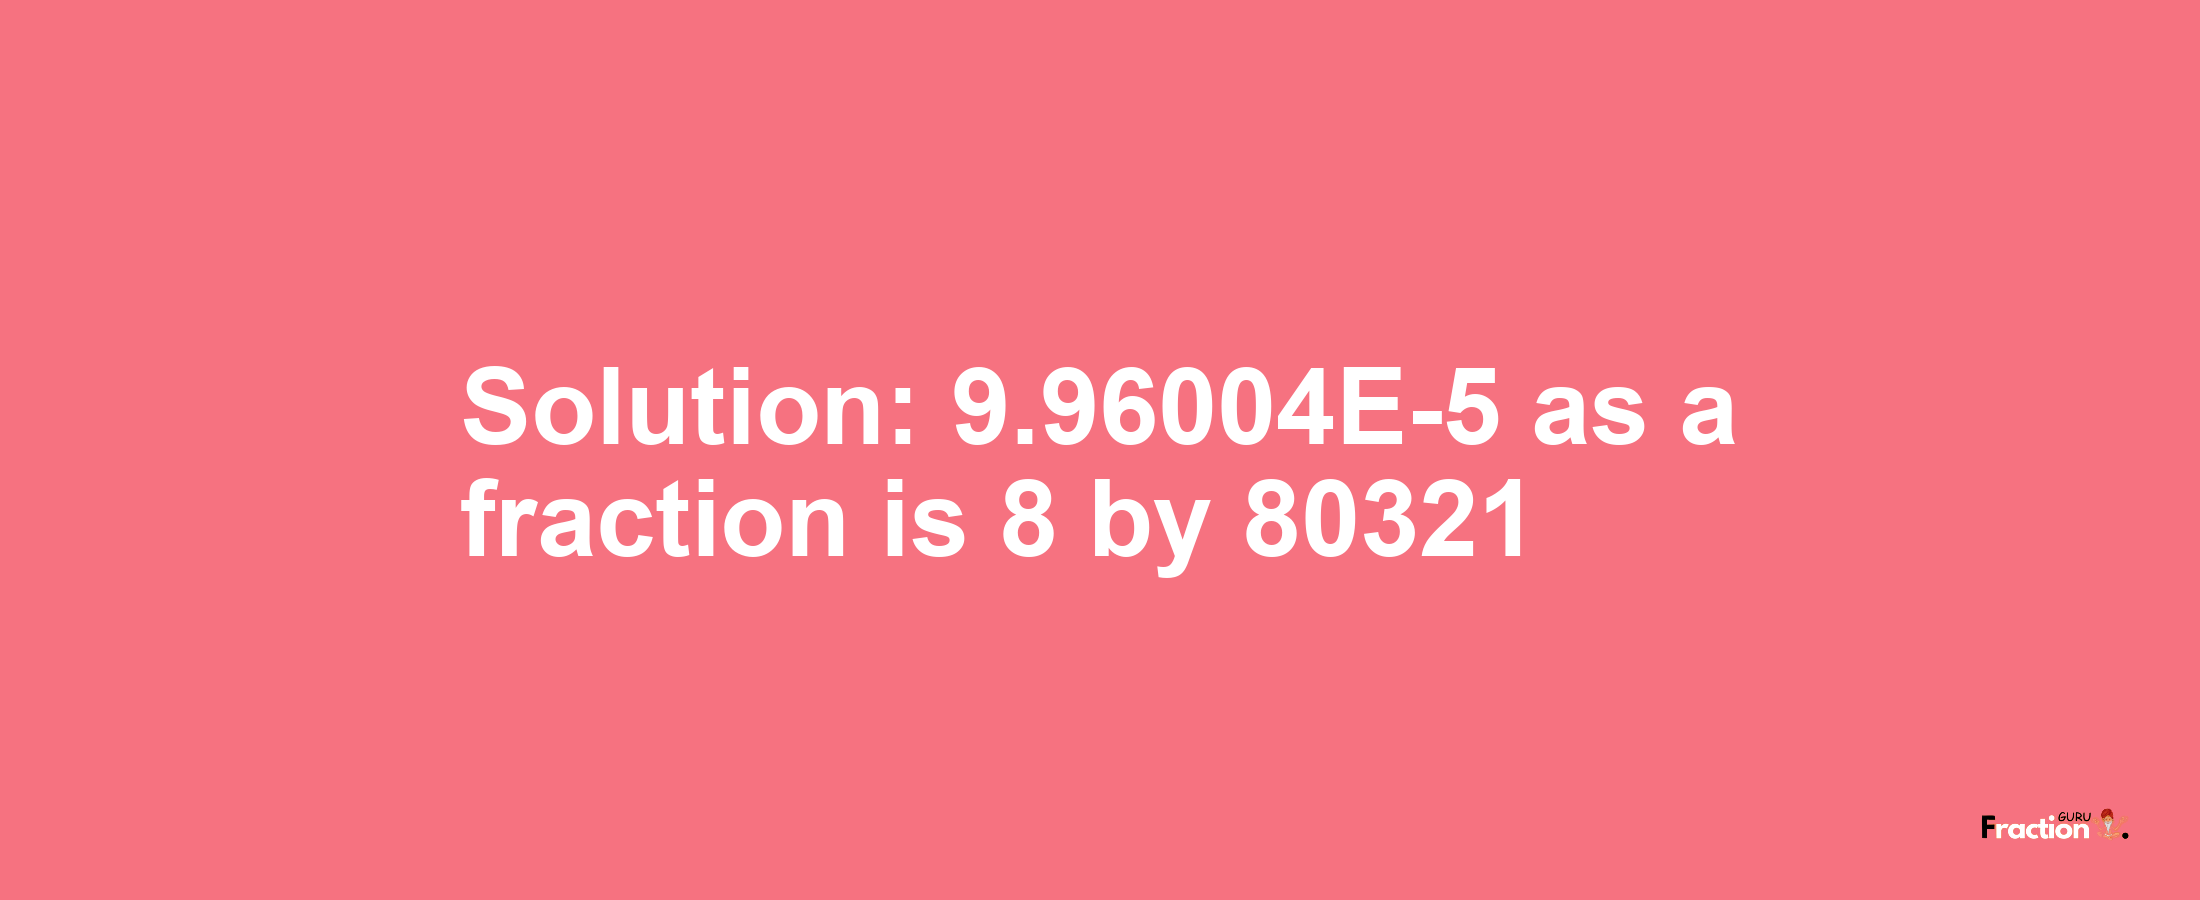 Solution:9.96004E-5 as a fraction is 8/80321